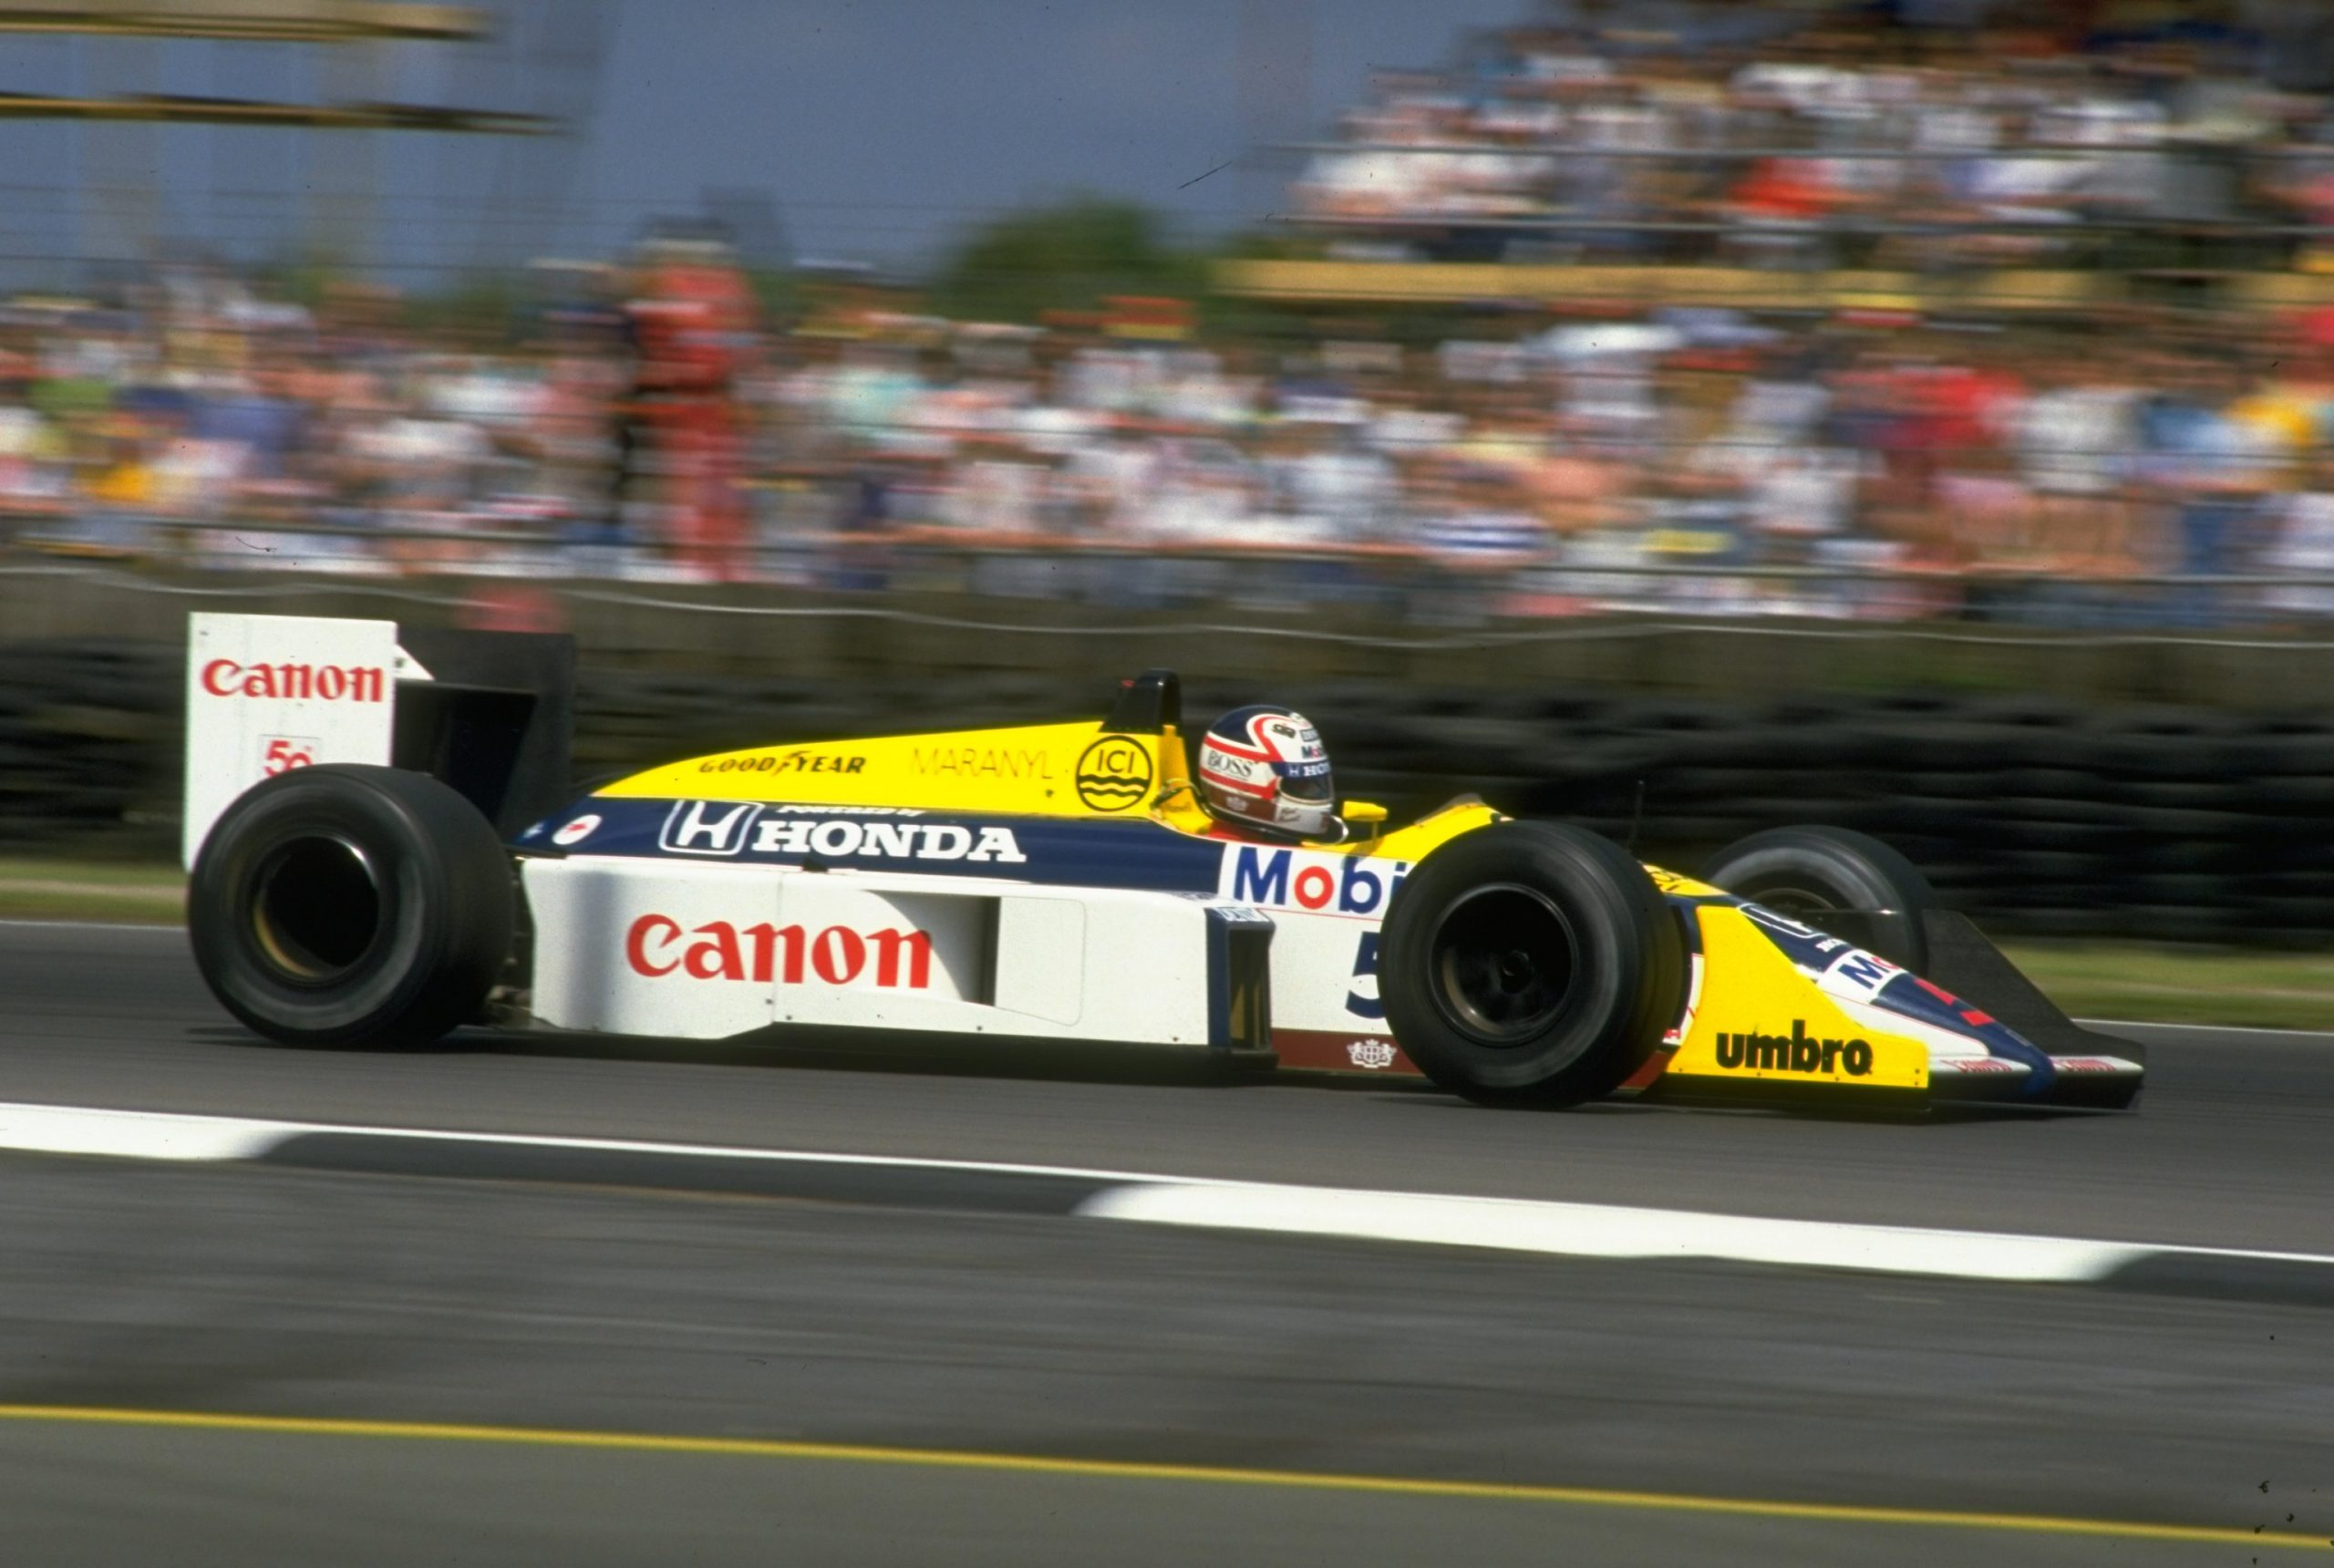 Masterclass: When Nigel Mansell destroyed Nelson Piquet at the 1987 British Grand Prix